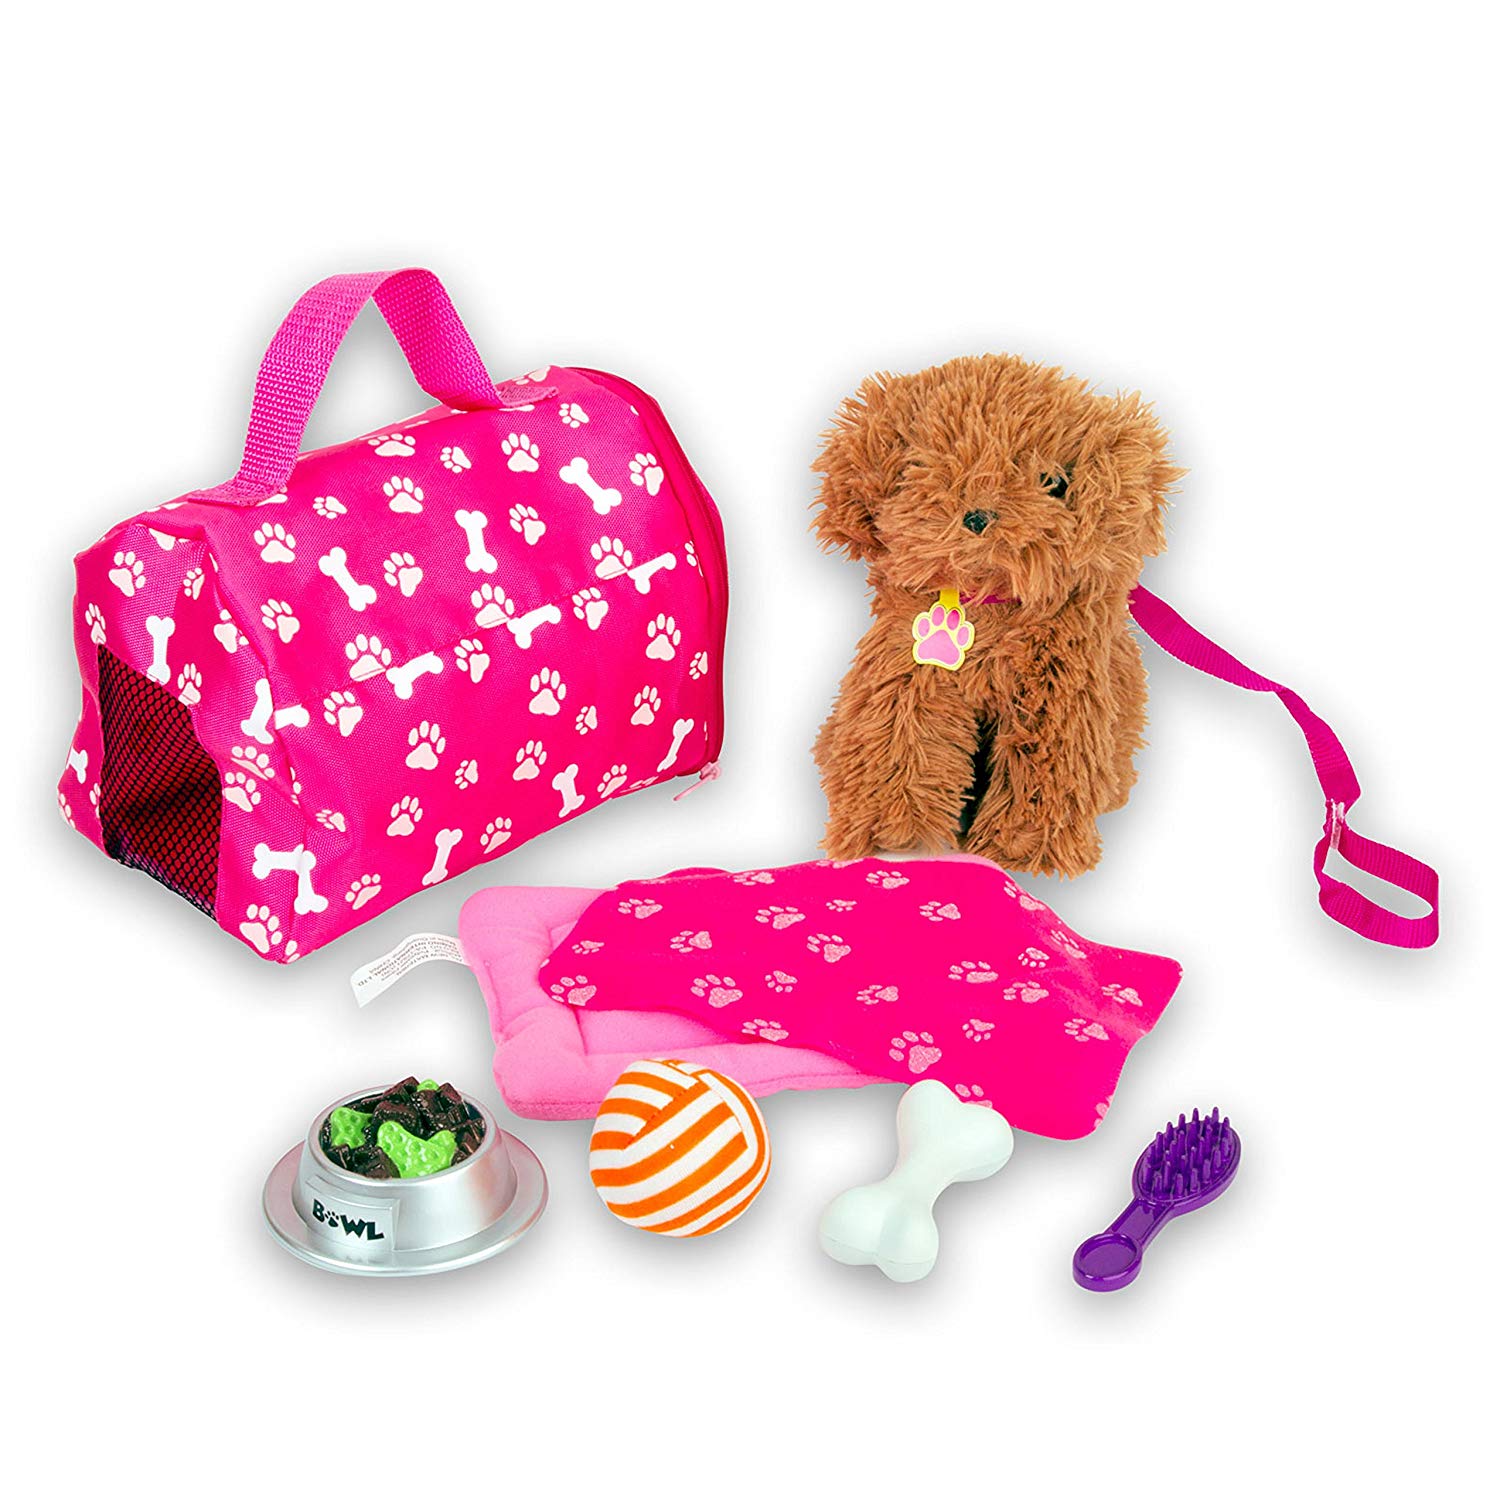 american girl doll accessories